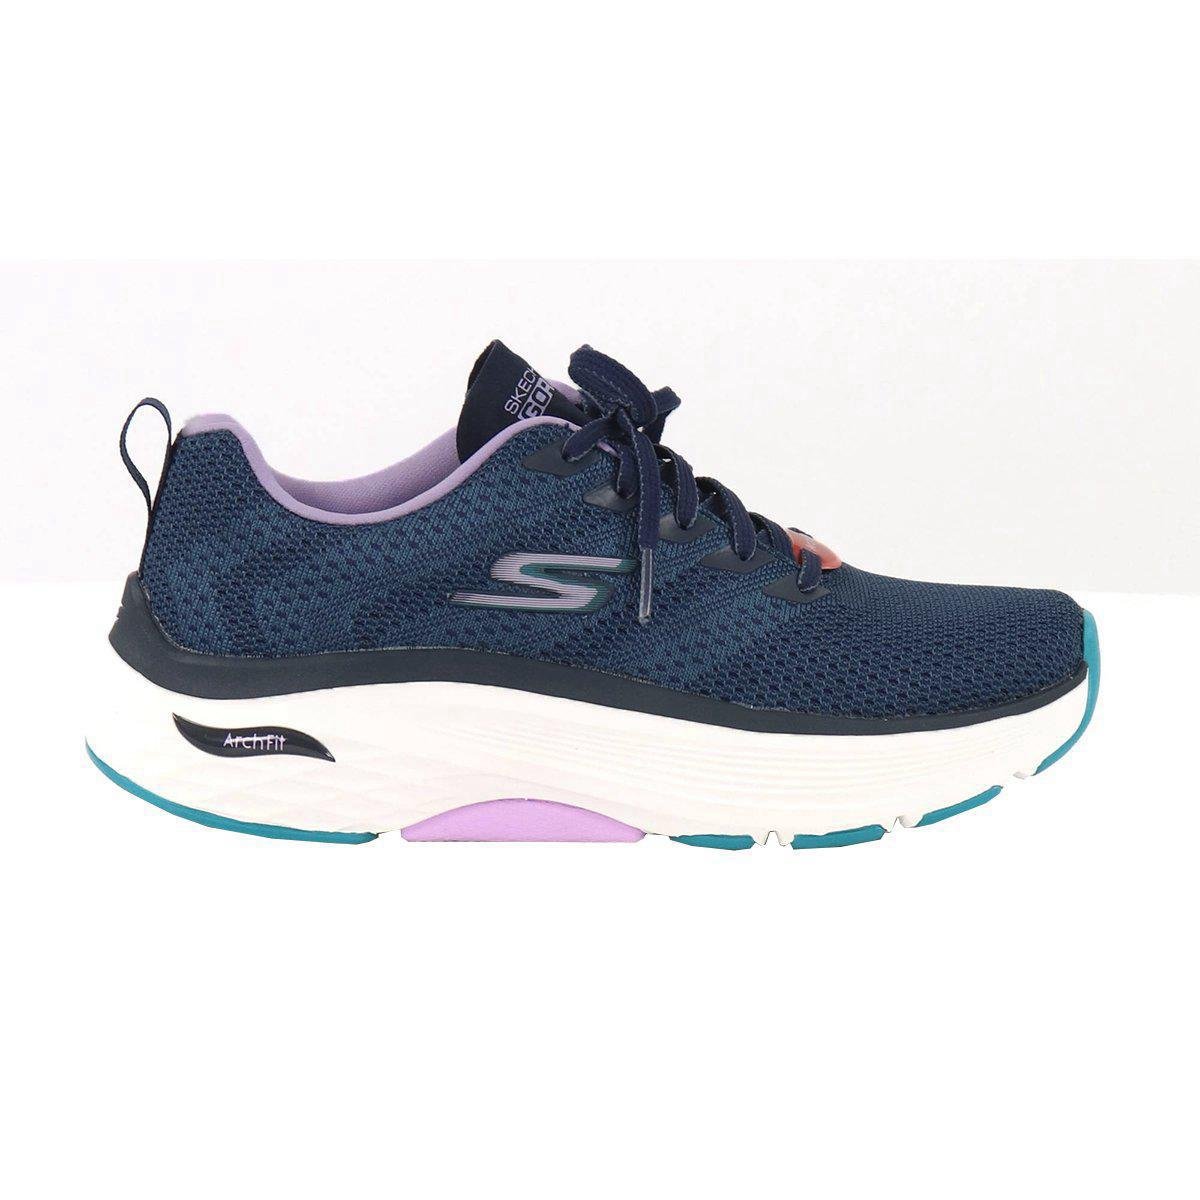 TENIS SKECHERS MAX CUSHIONING ARCH FIT 128308-NVY Azul 1